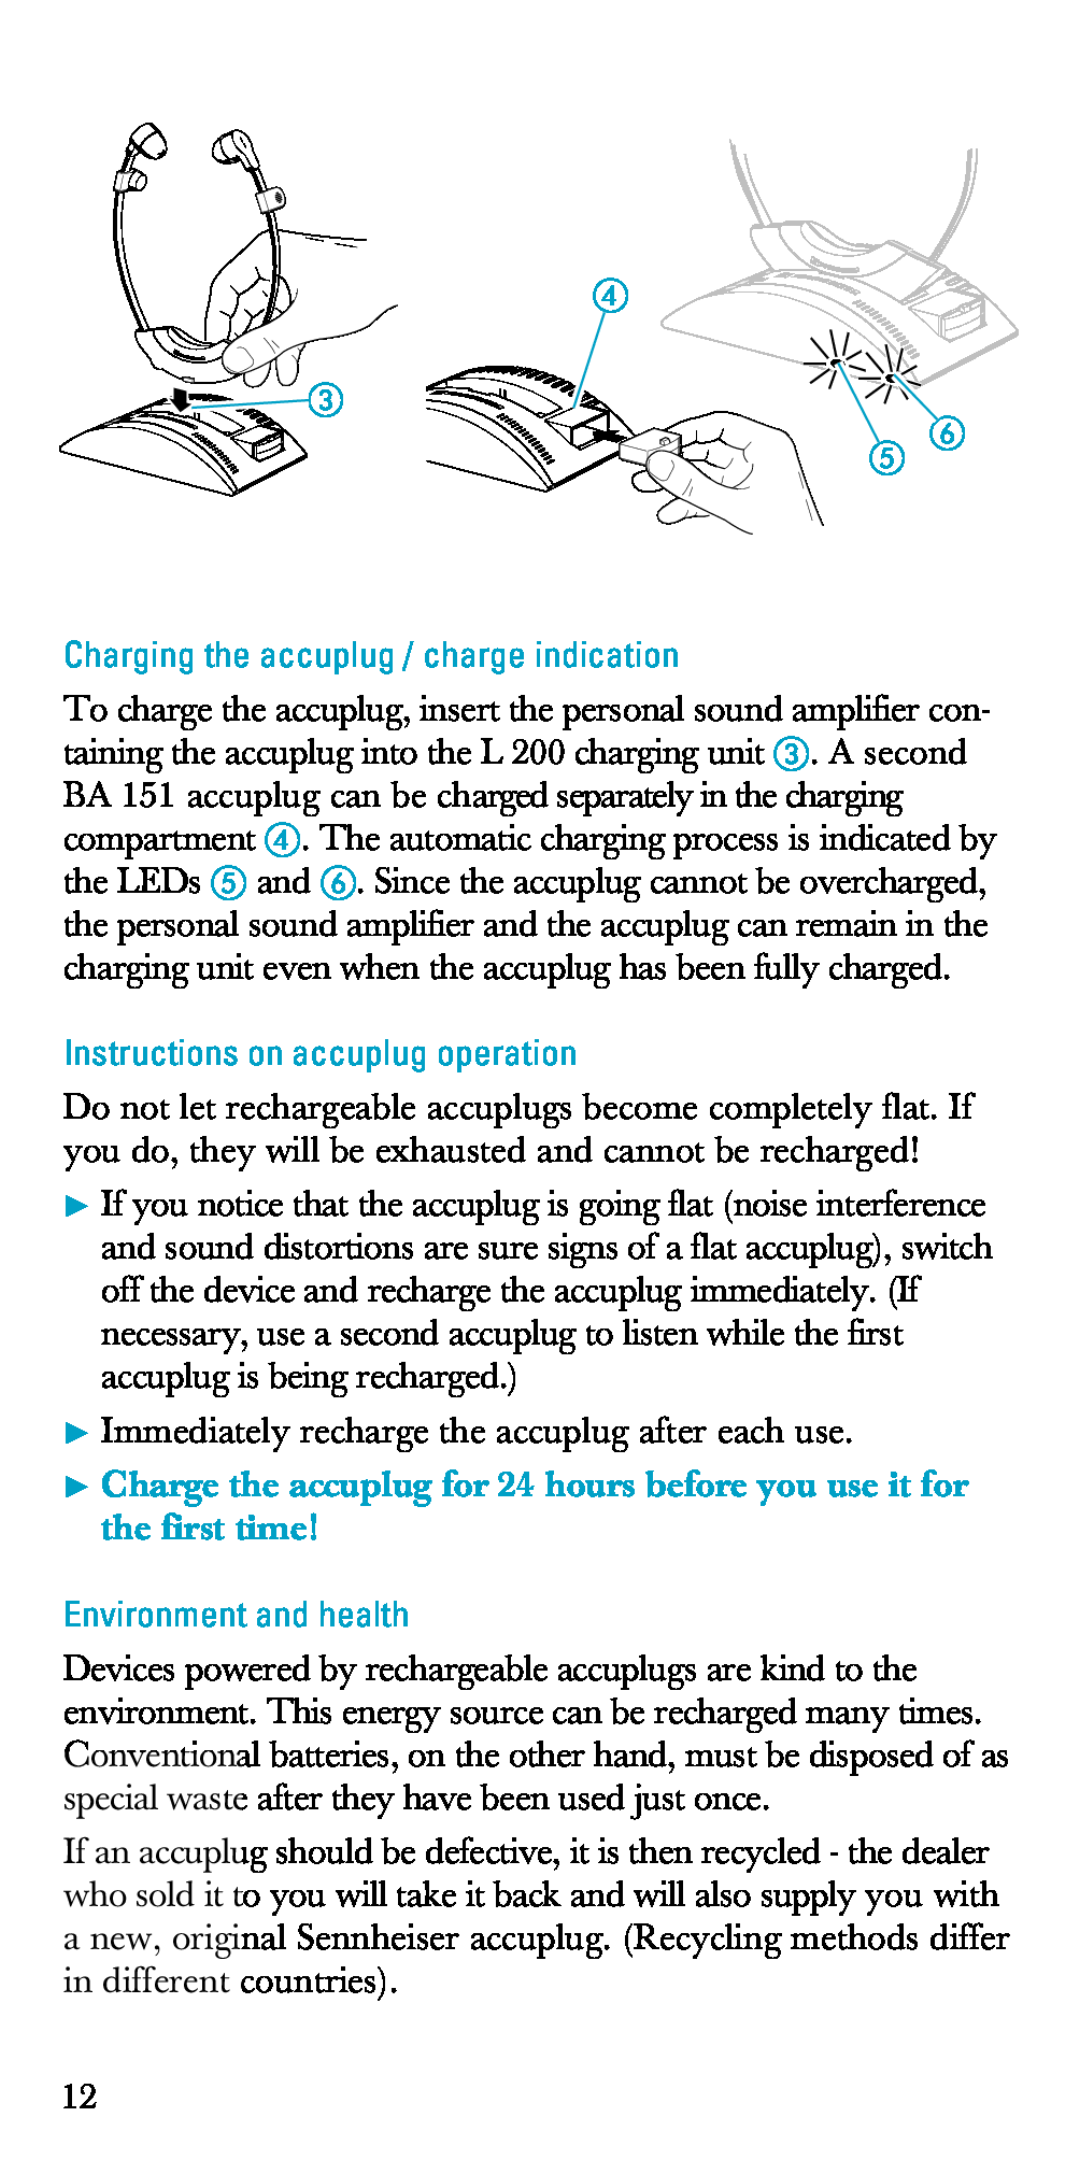 Sennheiser A200 Charging the accuplug / charge indication, Instructions on accuplug operation, Environment and health 